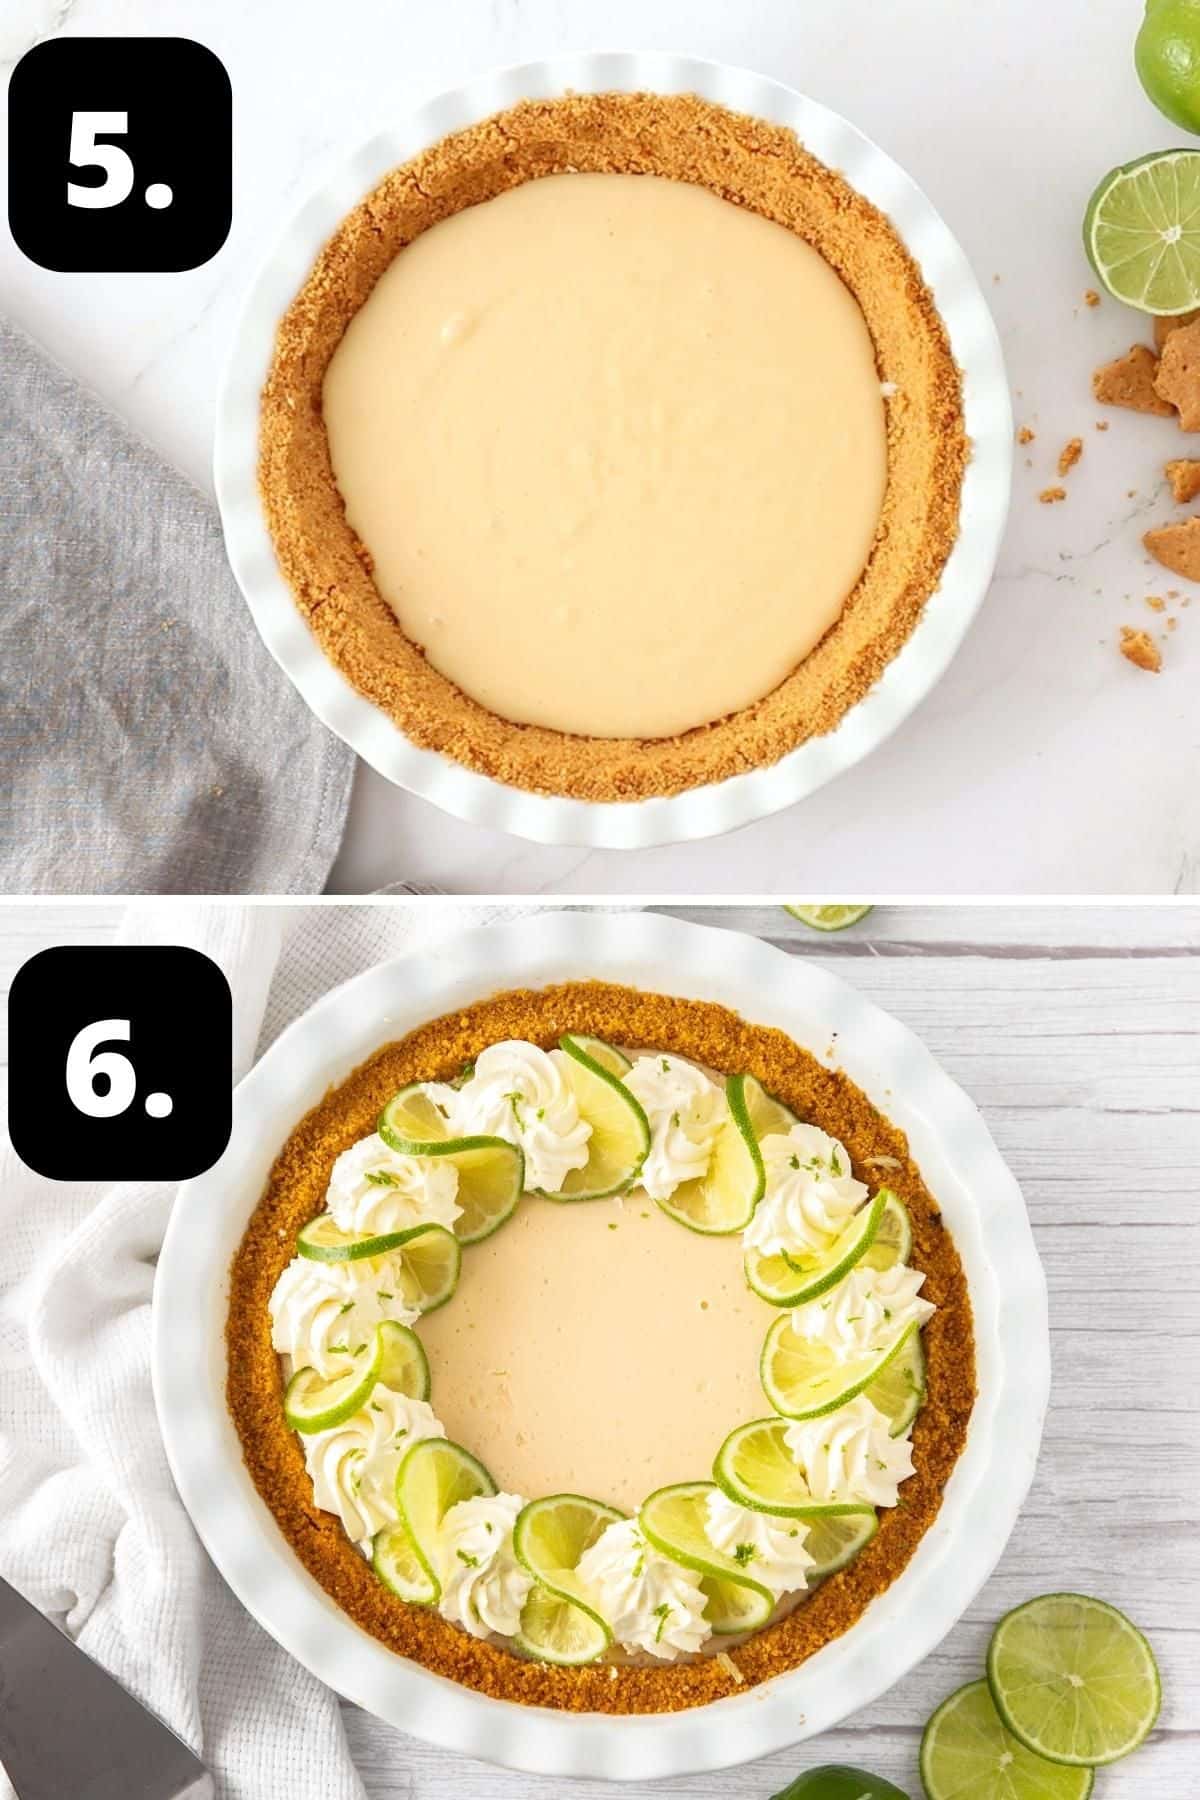 Steps 5-6 of preparing this recipe - the filling in the pie crust ready to bake and the decorated pie.